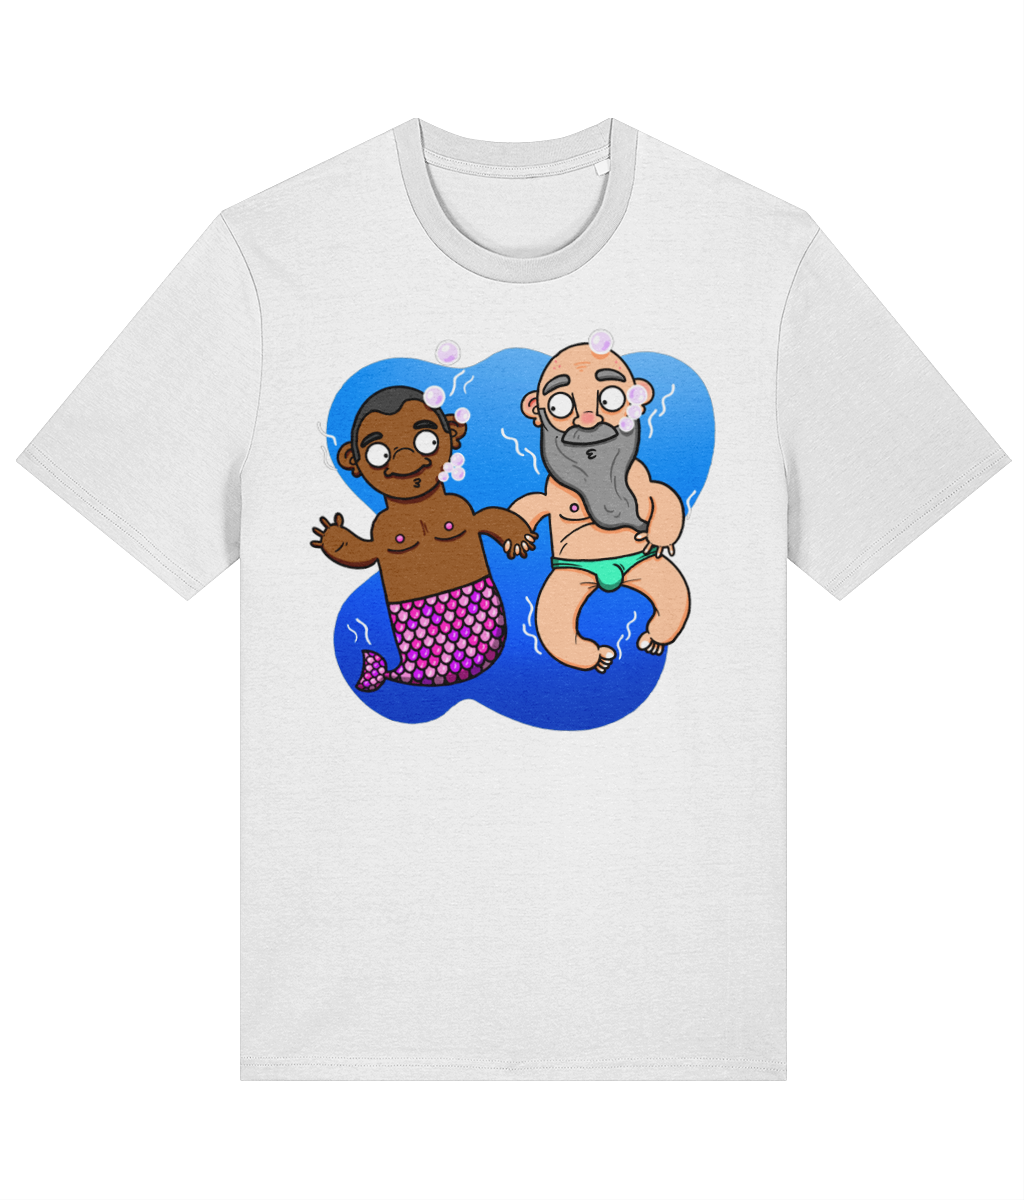 Taking a Plunge T-Shirt